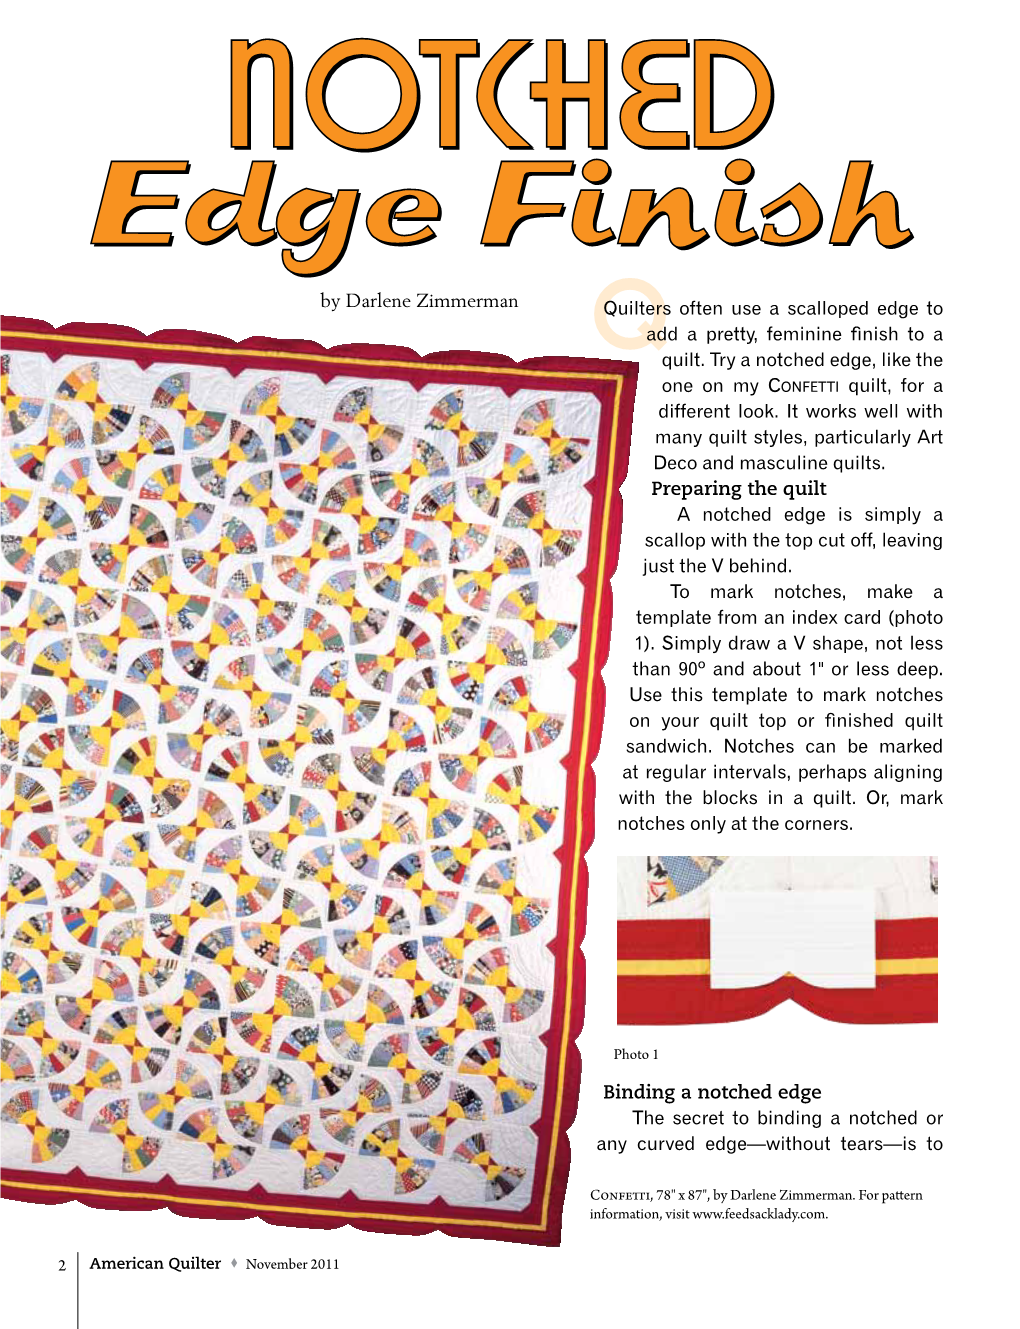 Notched Edge Finish Use a Single-Fold Bias Binding Continue in This Manner Cut 1¼" Wide